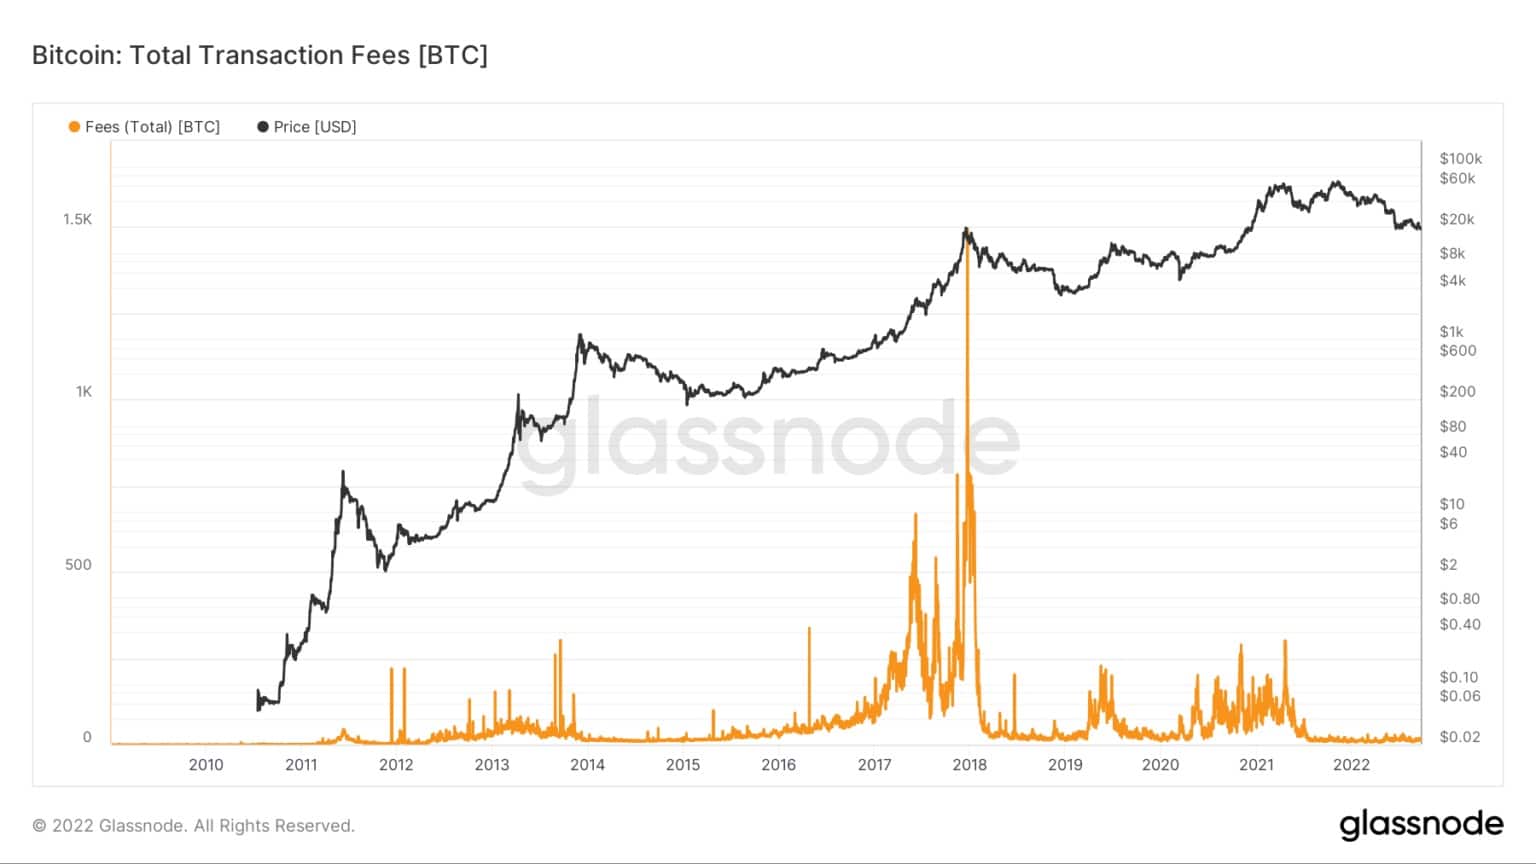 Total transaction fees on the Bitcoin network from 2010 to 2022 (Source: Glassnode)